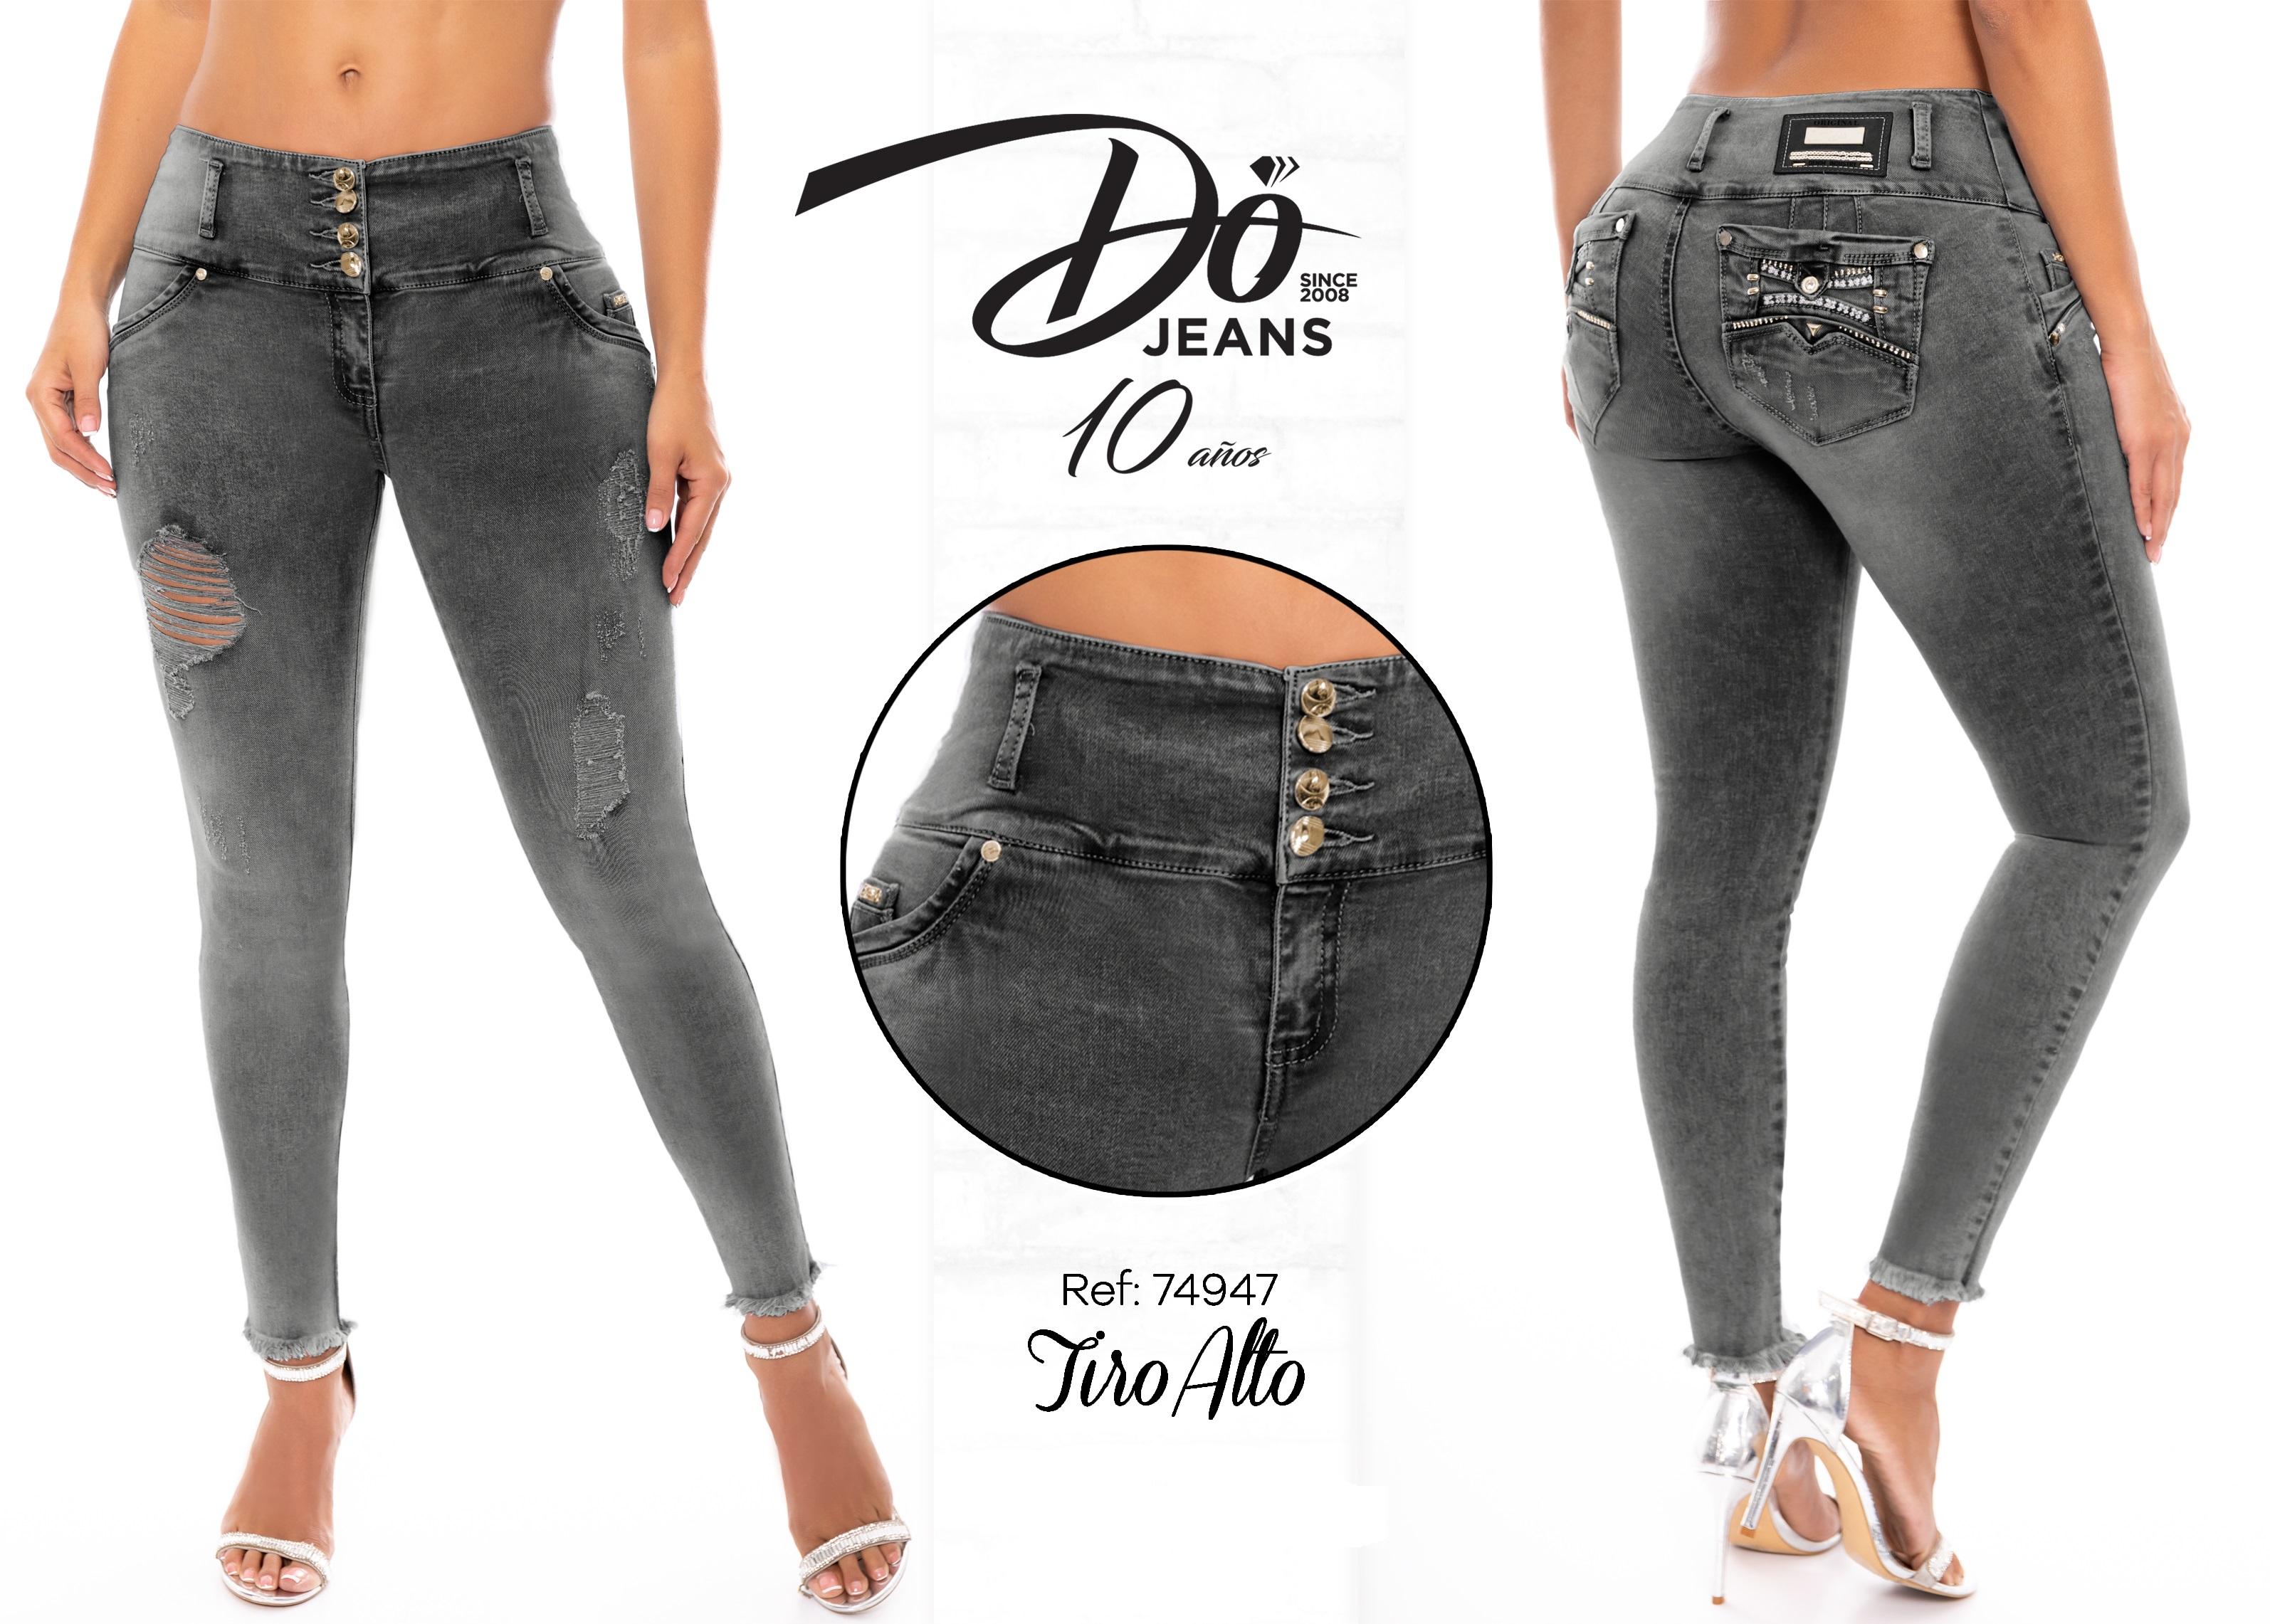 Jeans Levantacola Colombiano - Ref. 248 -74947 D